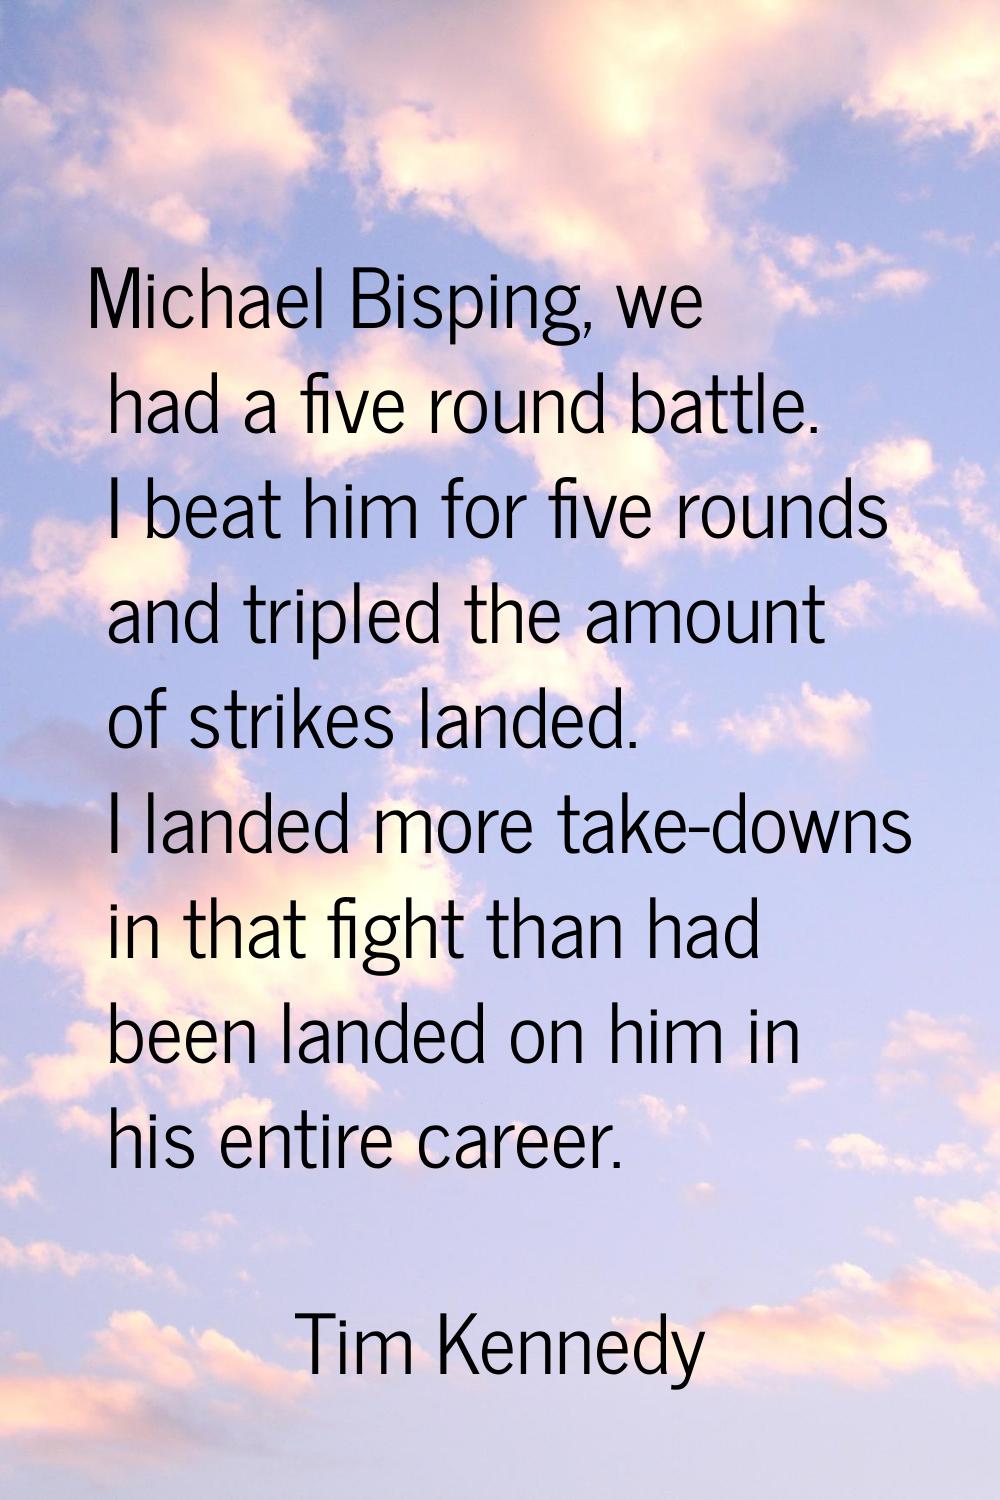 Michael Bisping, we had a five round battle. I beat him for five rounds and tripled the amount of s